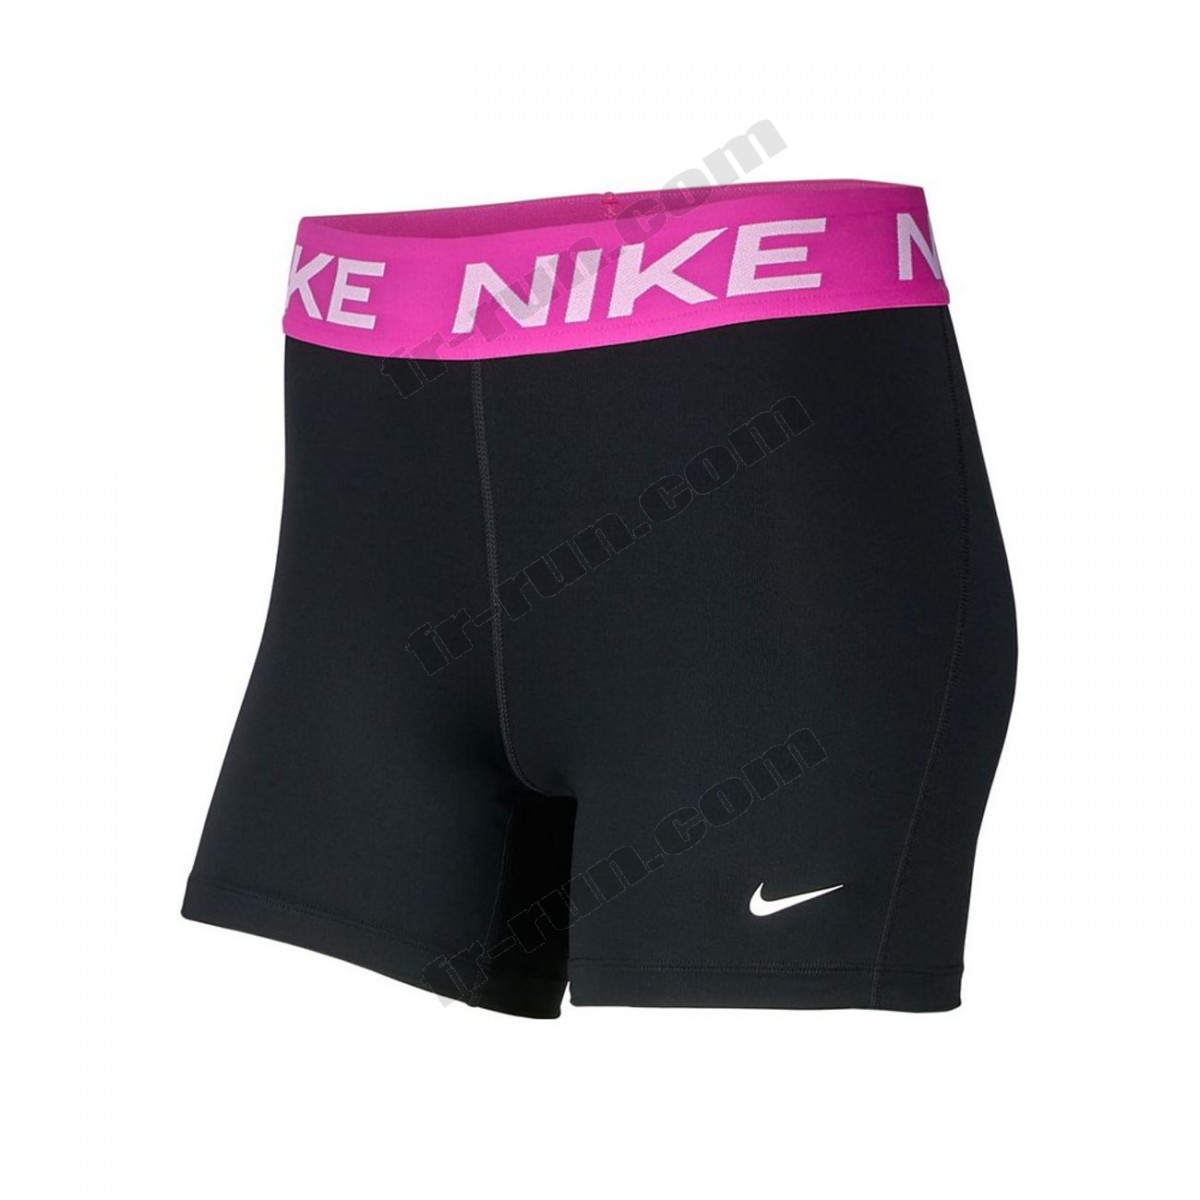 Nike/running femme NIKE Nike Wmns Victory Essential 5 √ Nouveau style √ Soldes - -0